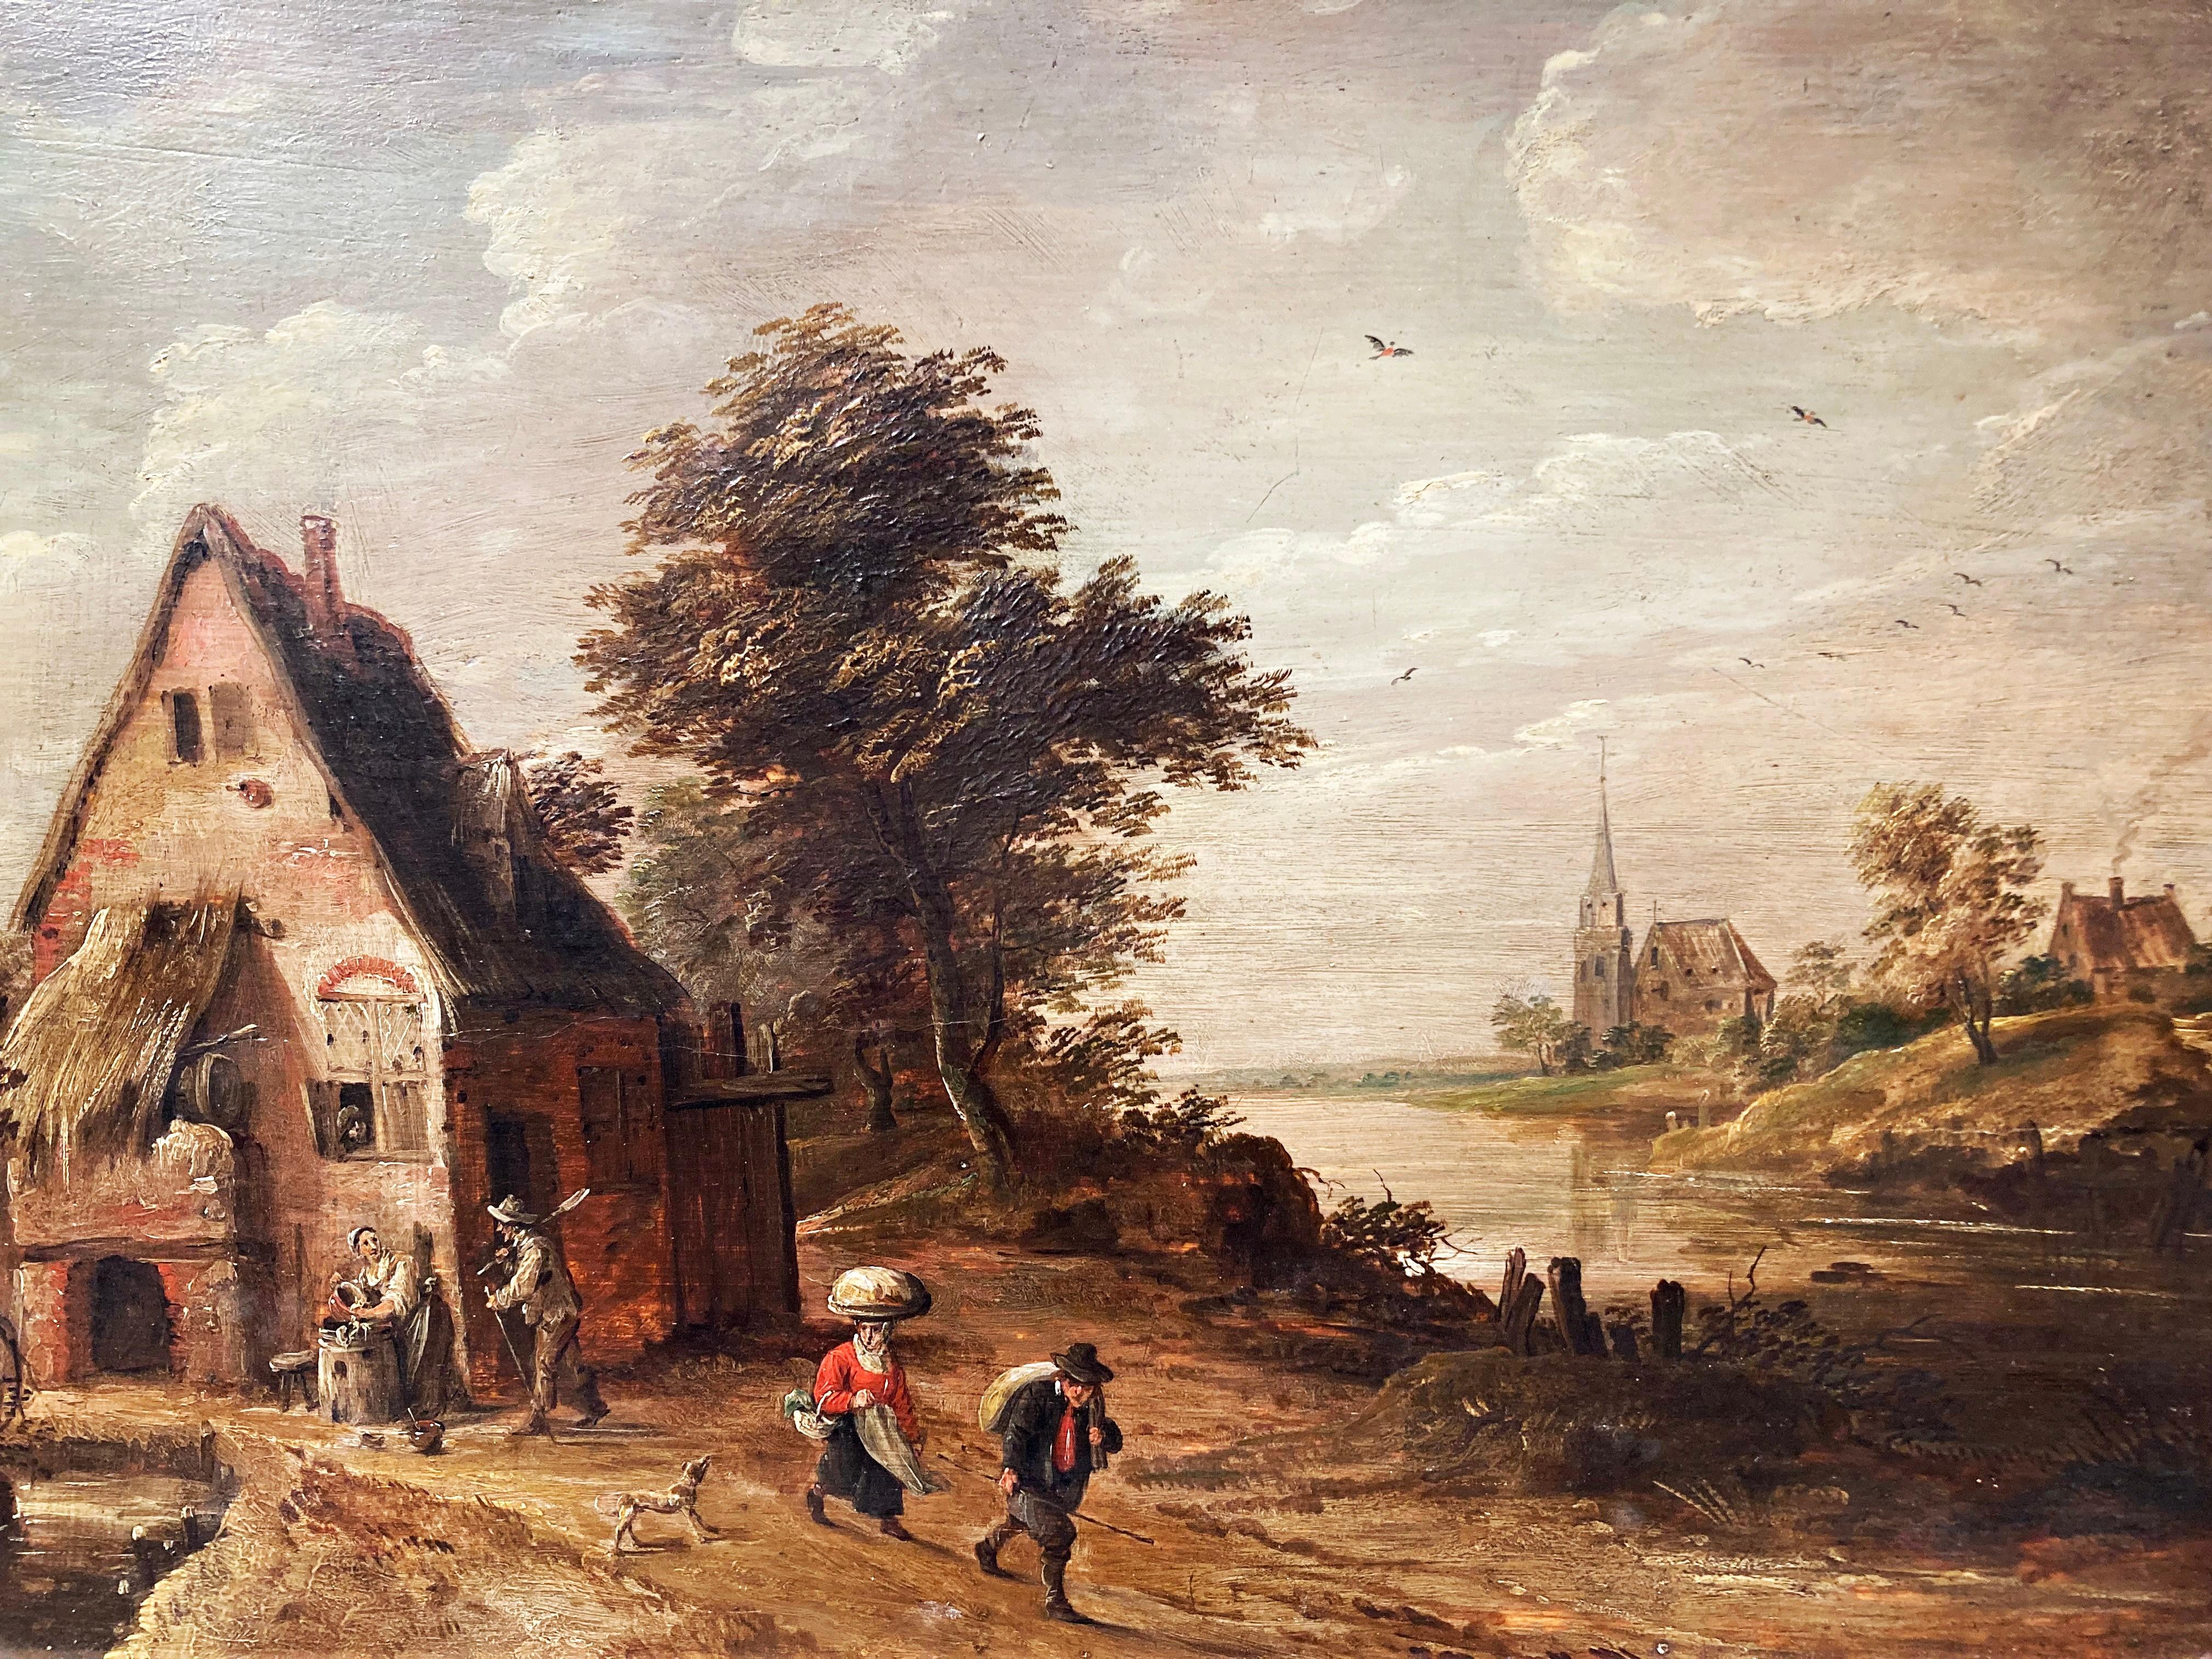 Circle of David Teniers, Landscape with Peasants by an Inn and a River, Dutch  - Baroque Painting by David Teniers the Younger